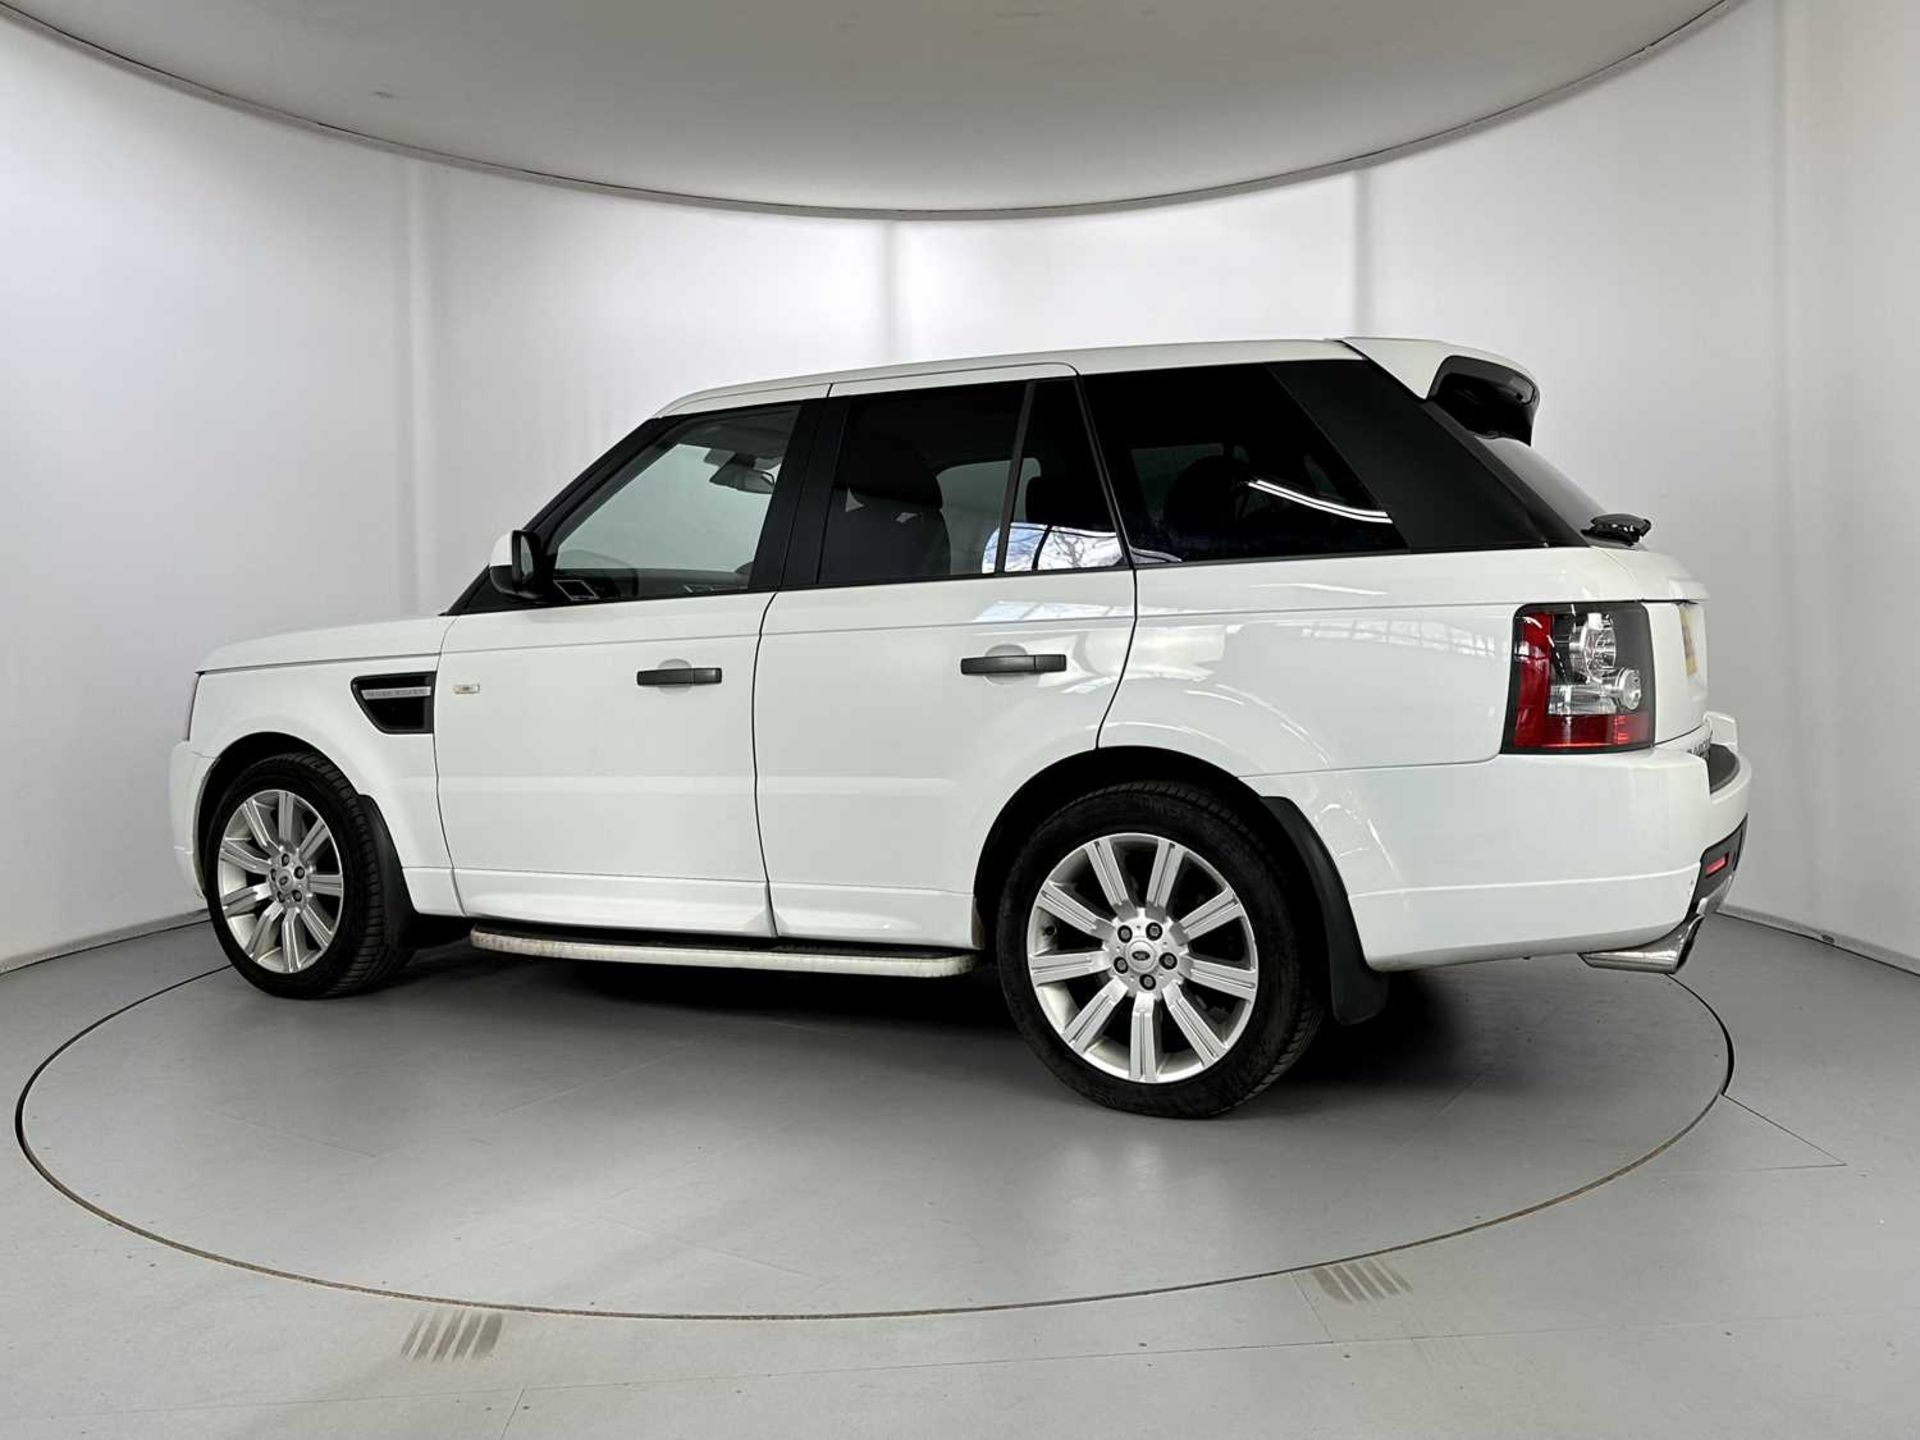 2011 Land Rover Range Rover Sport Stormer Edition  - Image 6 of 33